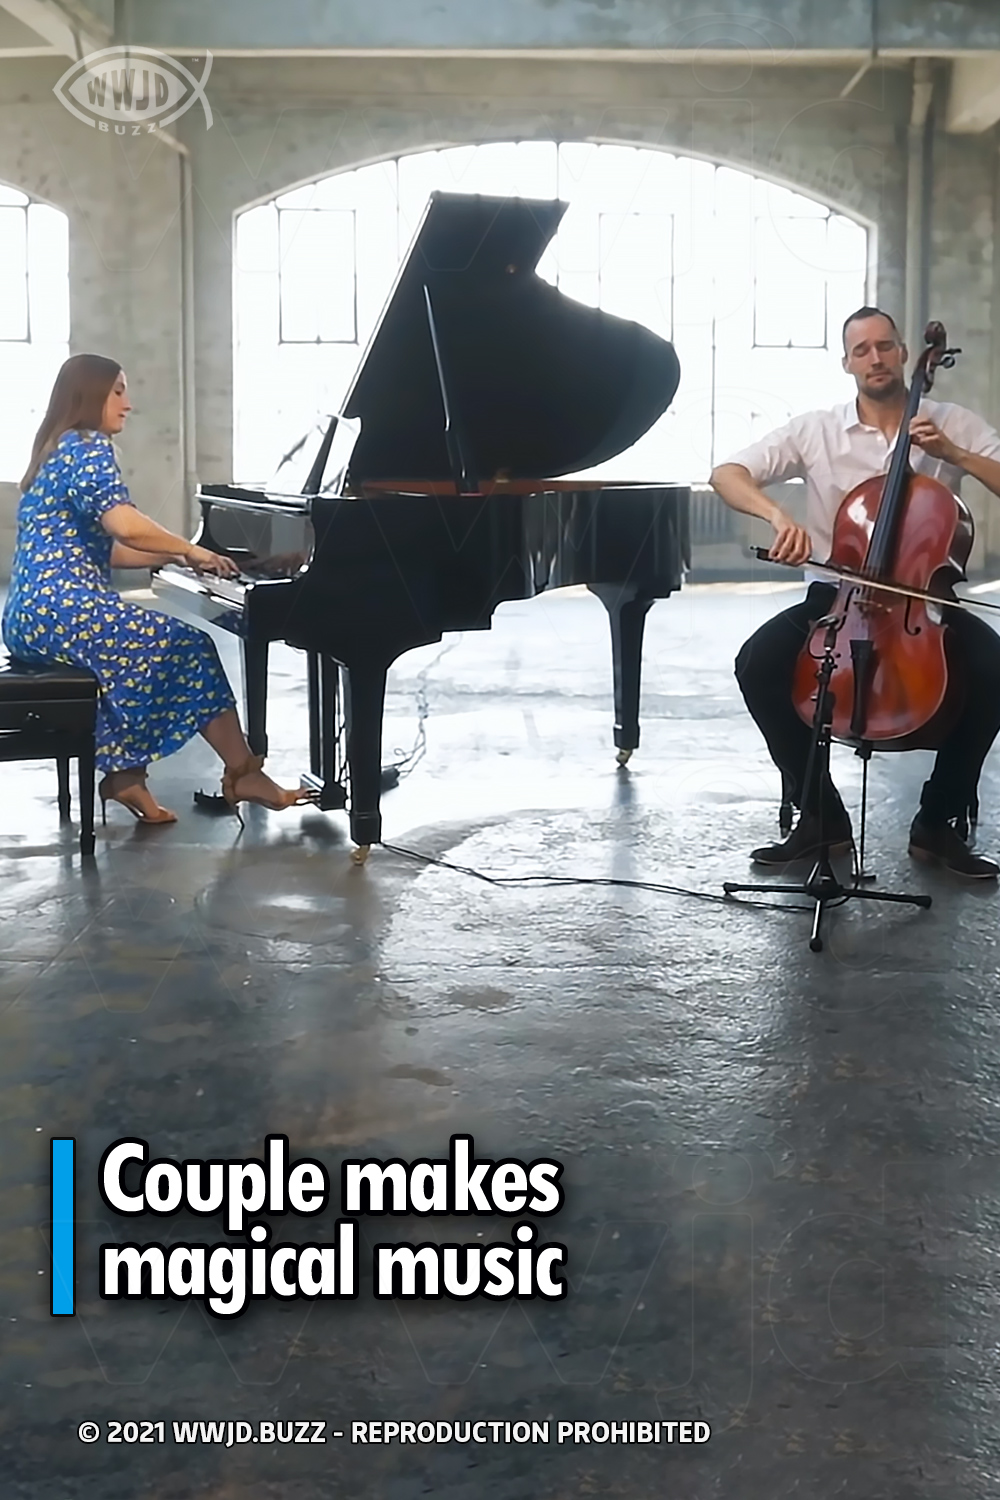 Couple makes magical music